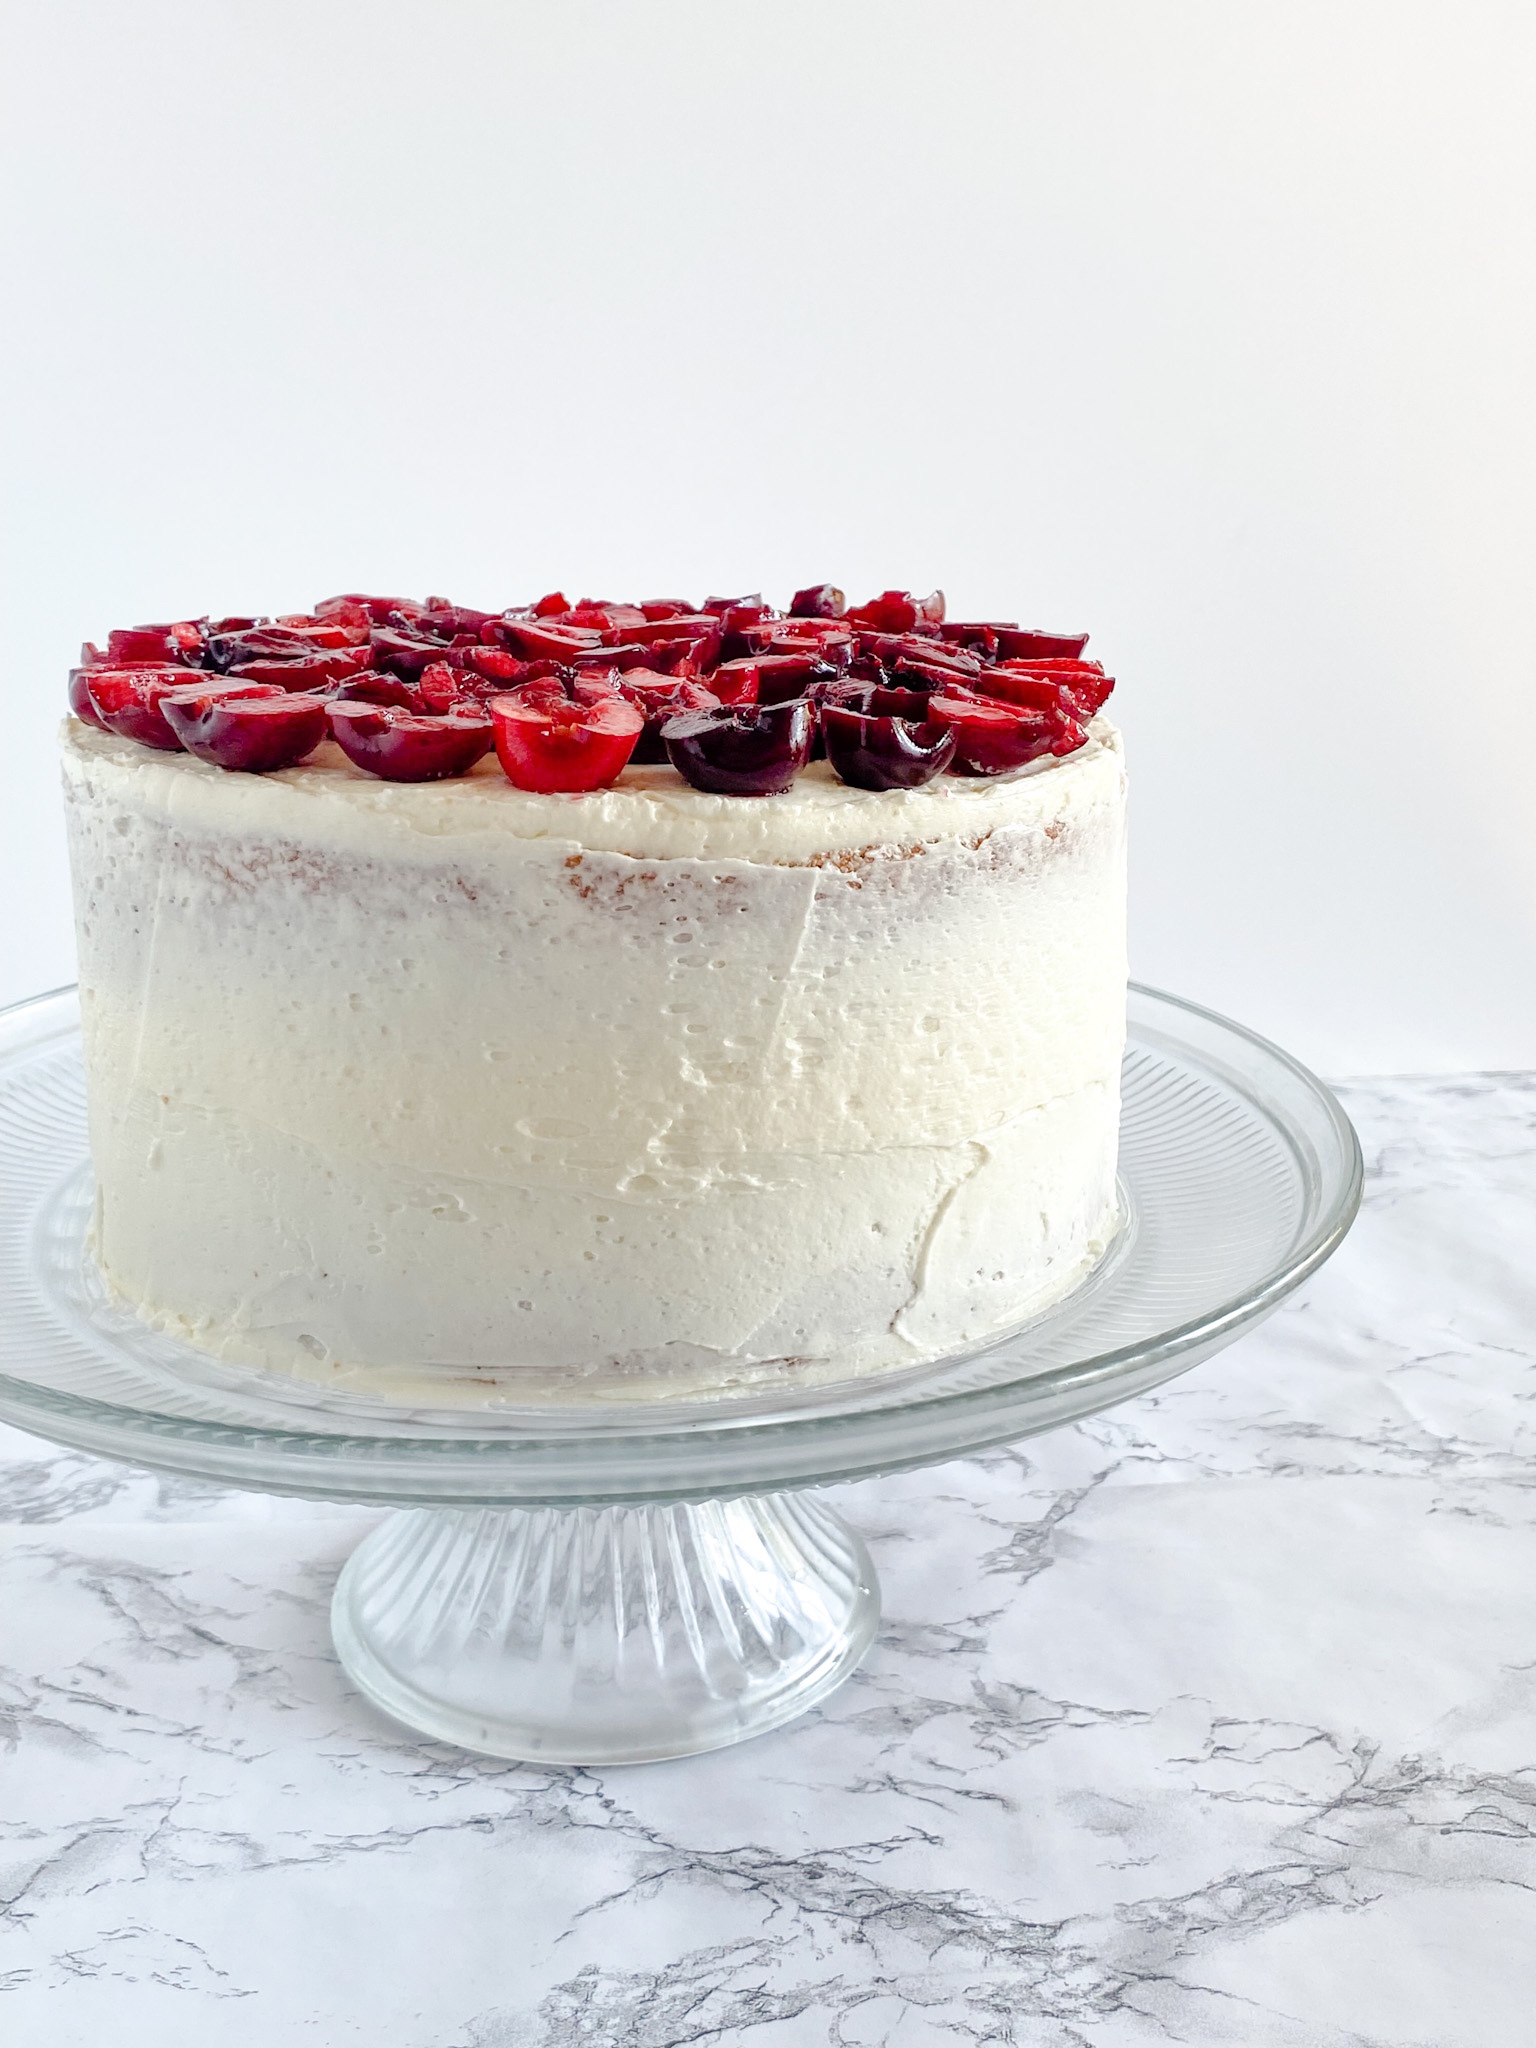 A lightly-frosted white cake topped with fresh cherries on a glass cake stand on a marble surface